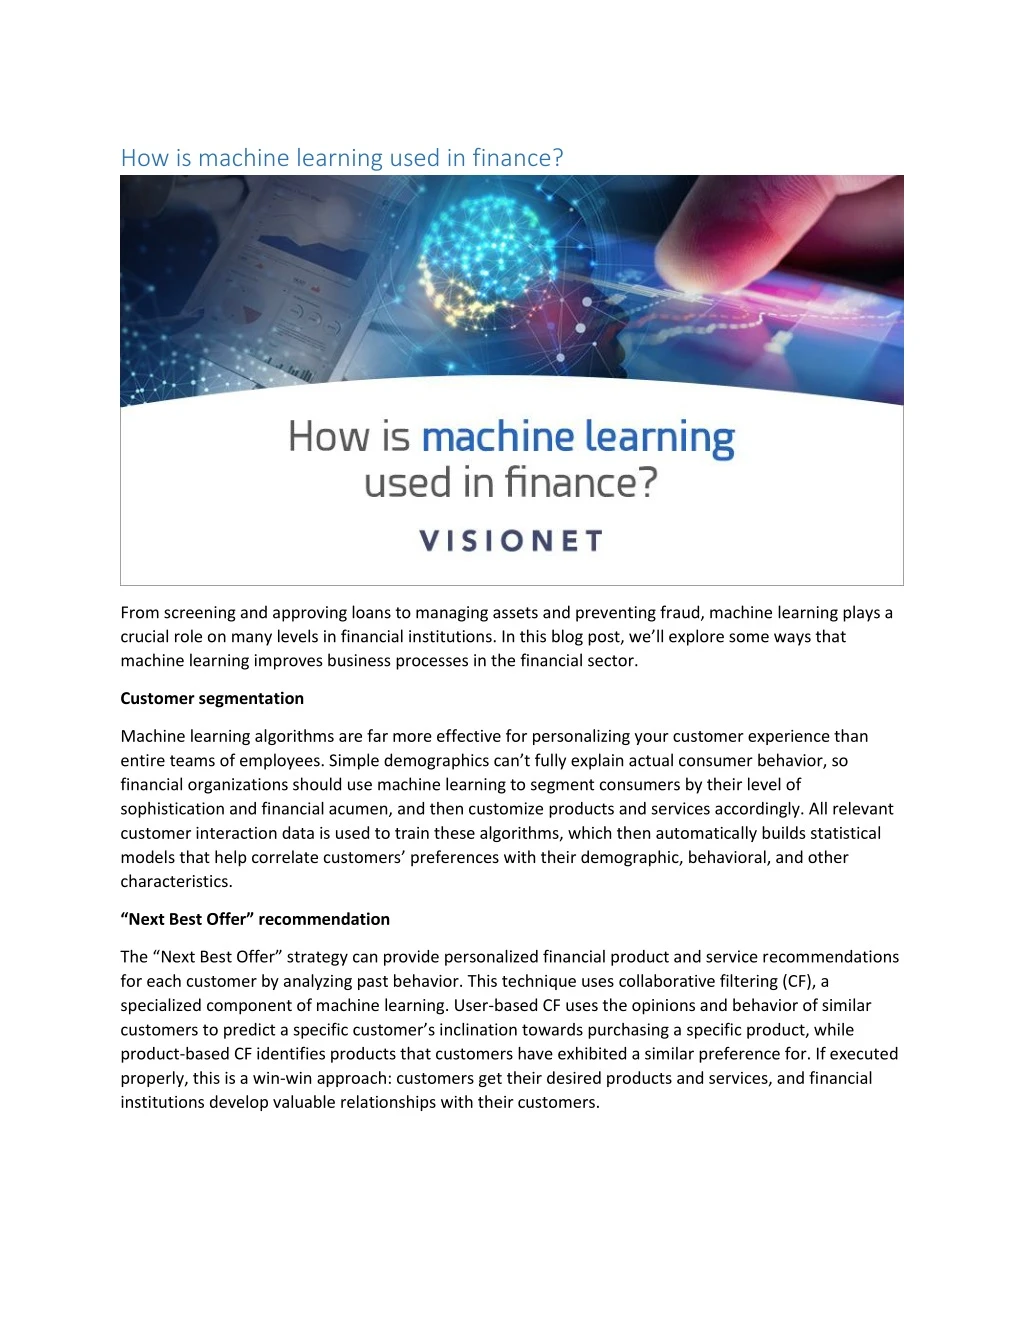 how is machine learning used in finance